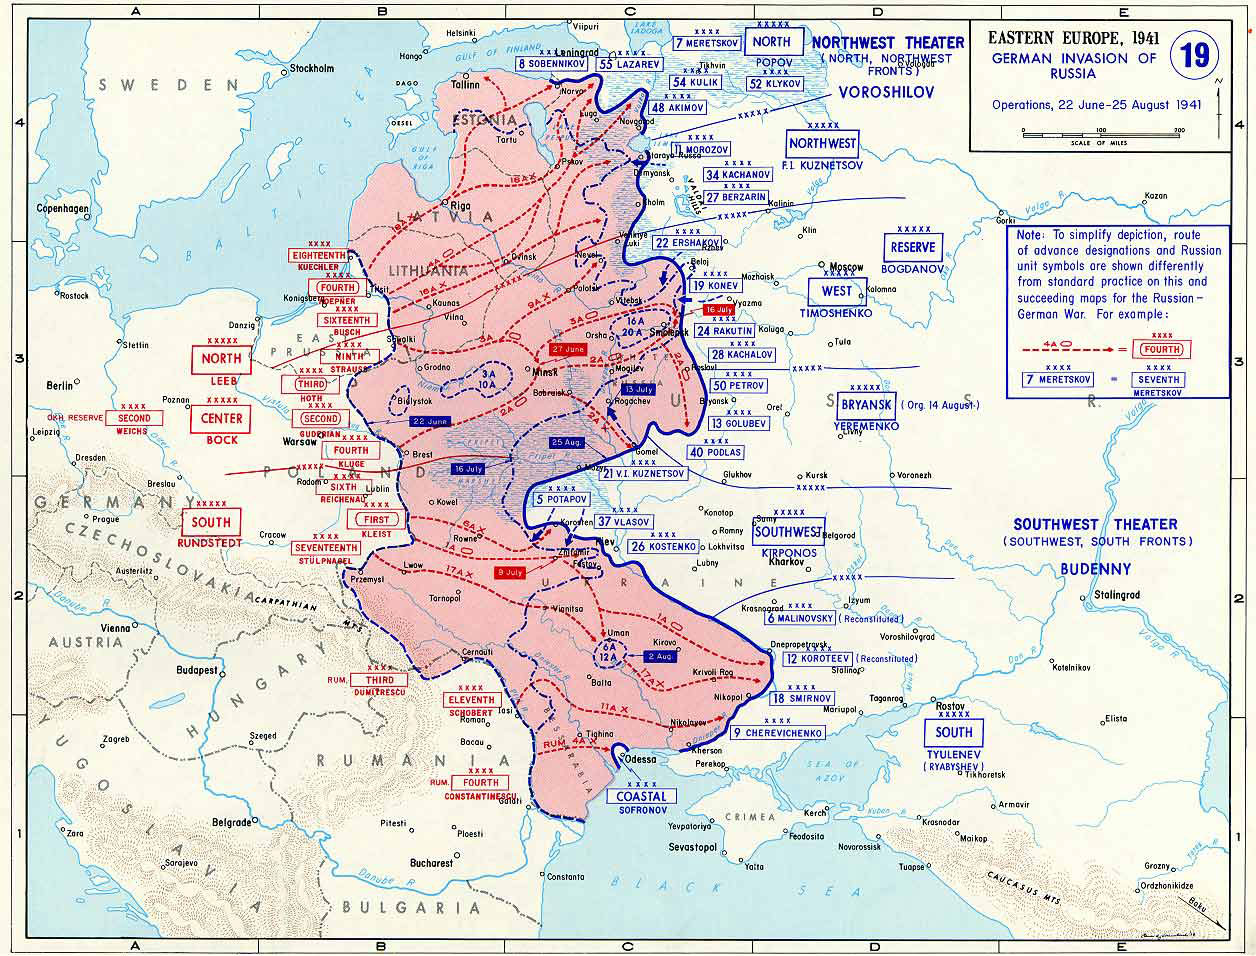 Map of Operation Barbarossa, the German invasion of the Soviet Union, 22 Jun-25 Aug 1941 (US Military Academy)